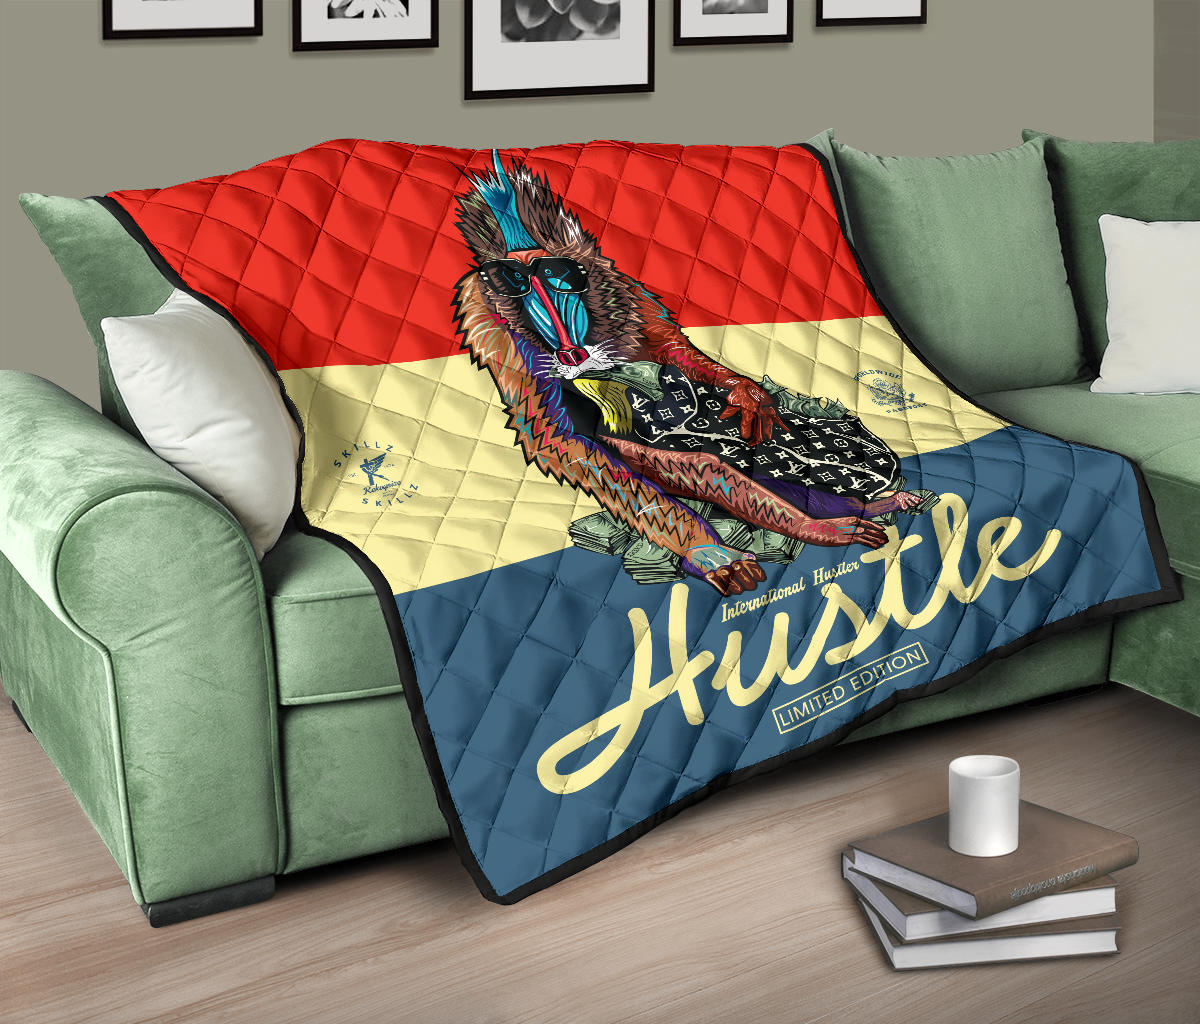 "Hustle Mammal" Limited Edition Quilt